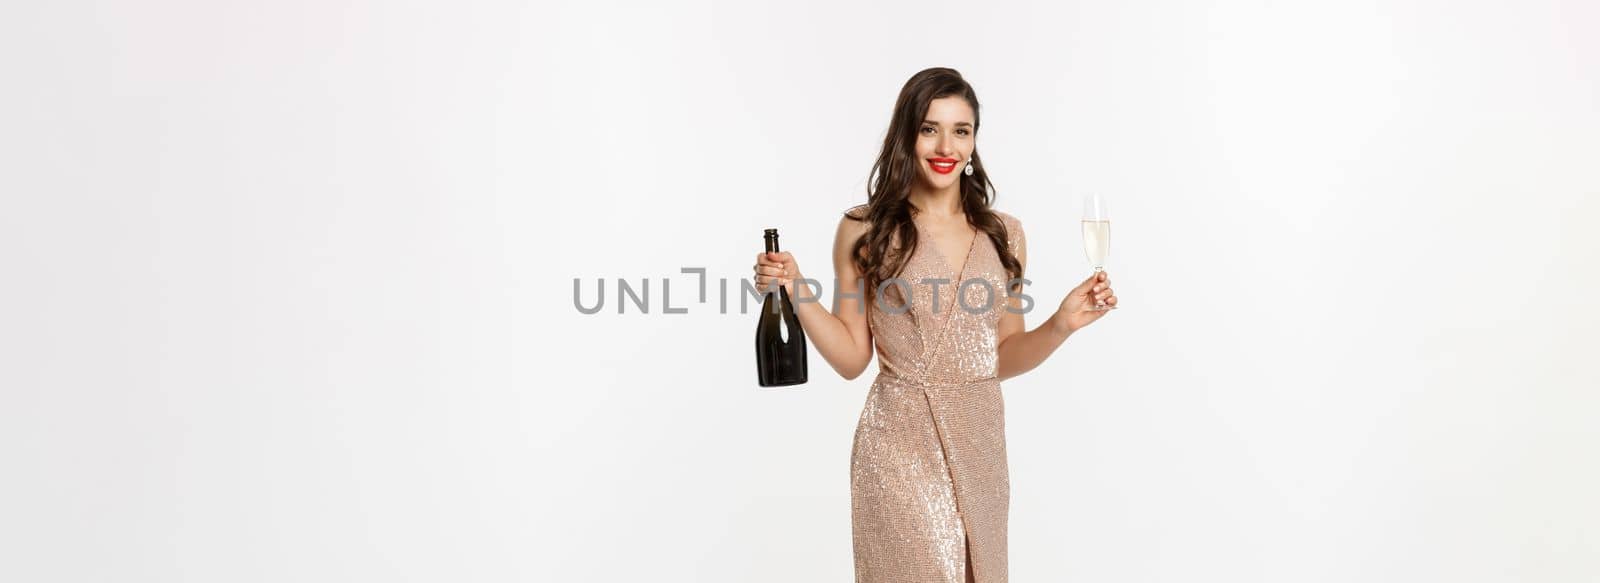 Christmas party and celebration concept. Full length of elegant woman with red lips, luxury dress, holding glass of champagne and bottle, white background.